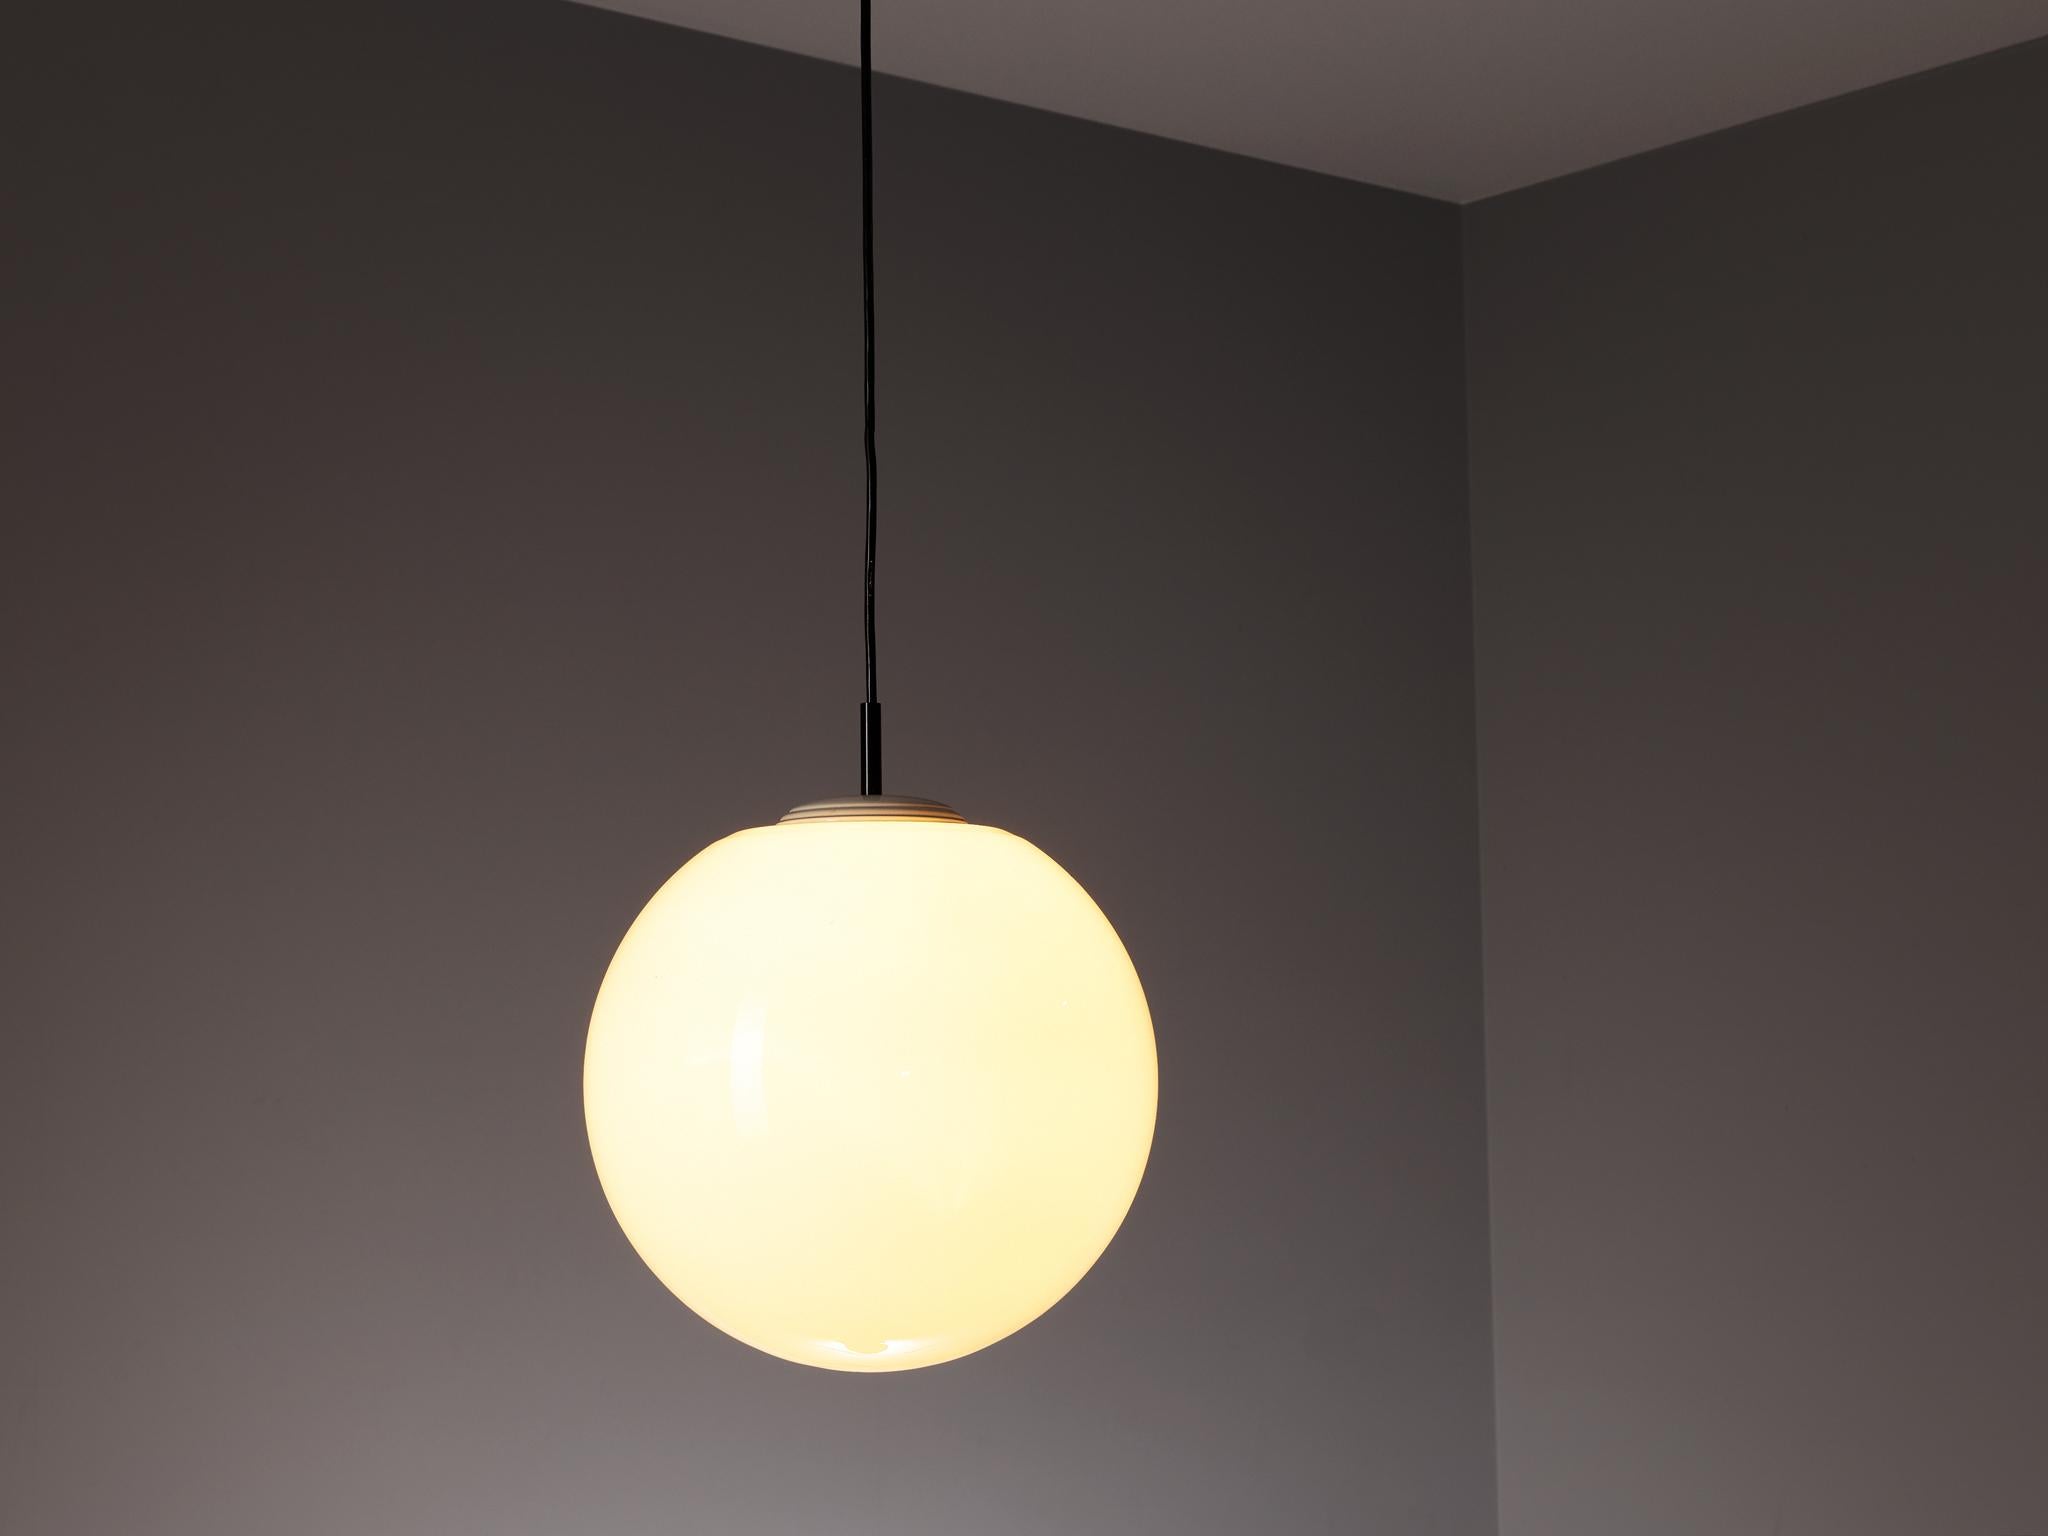 Pendants, glass, metal, Europe, 1960s

A milk glass pendant with contrasting black wiring that creates a convivial and easy feel. The opaque glass sphere creates a beautiful and warm diffused light. Kindly note that we have five available, this